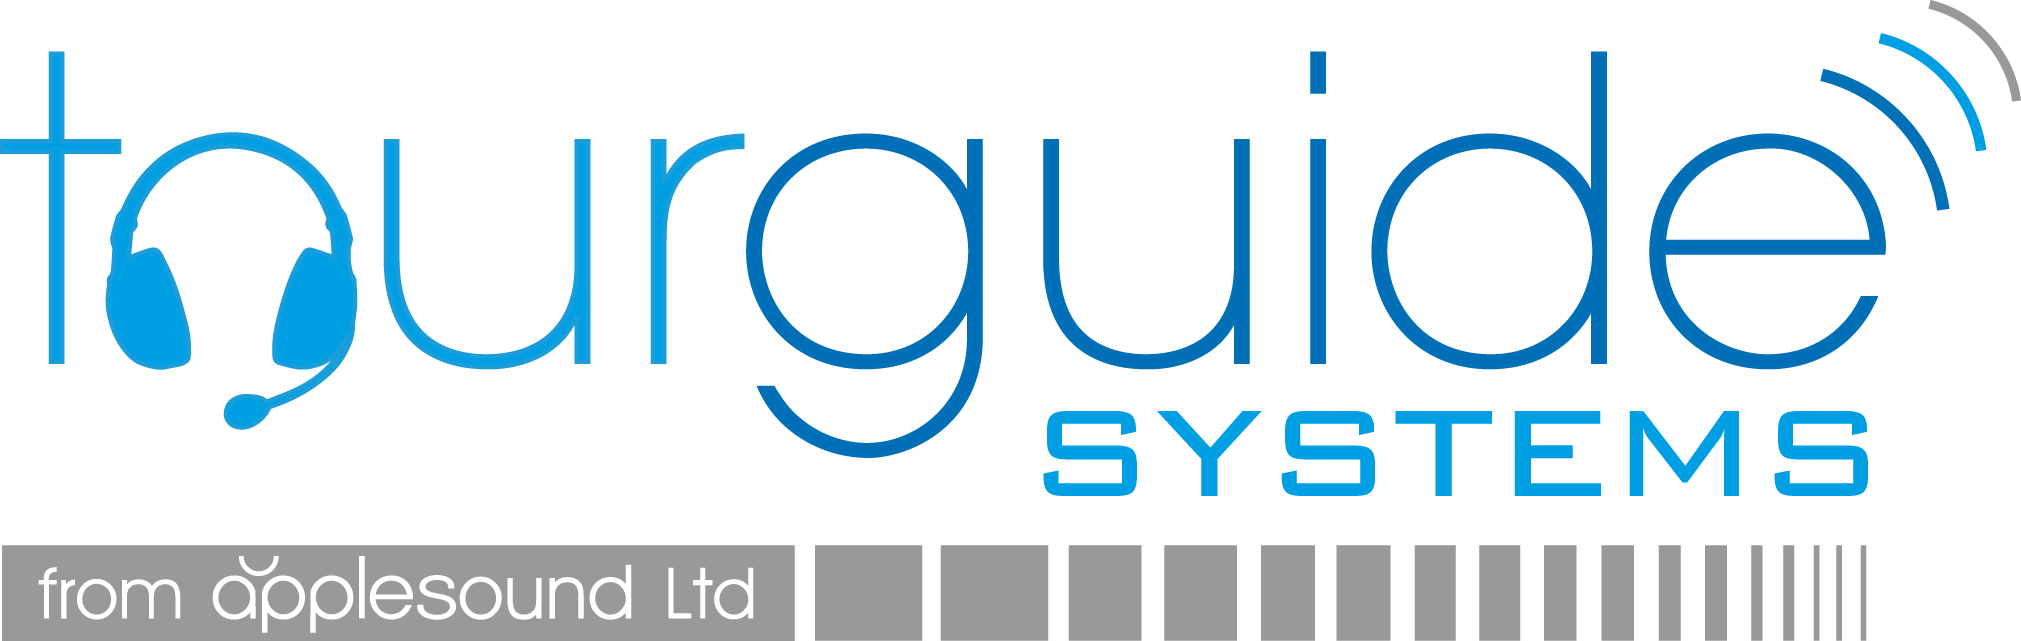 Tourguide-SYSTEMS from Apple Sound Ltd